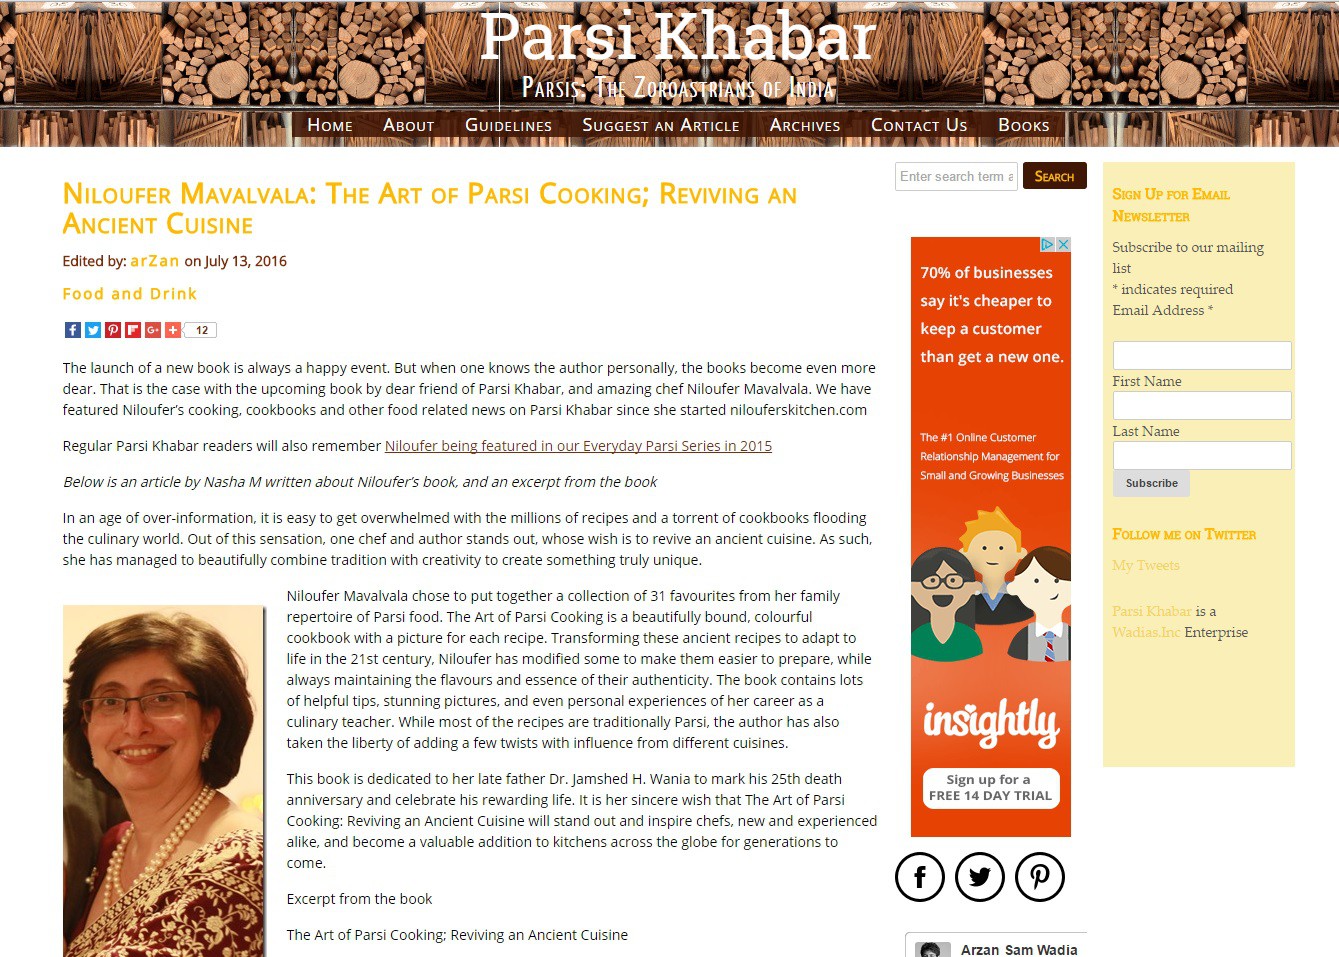 The Art of Parsi Cooking Featured by Parsi Khabar